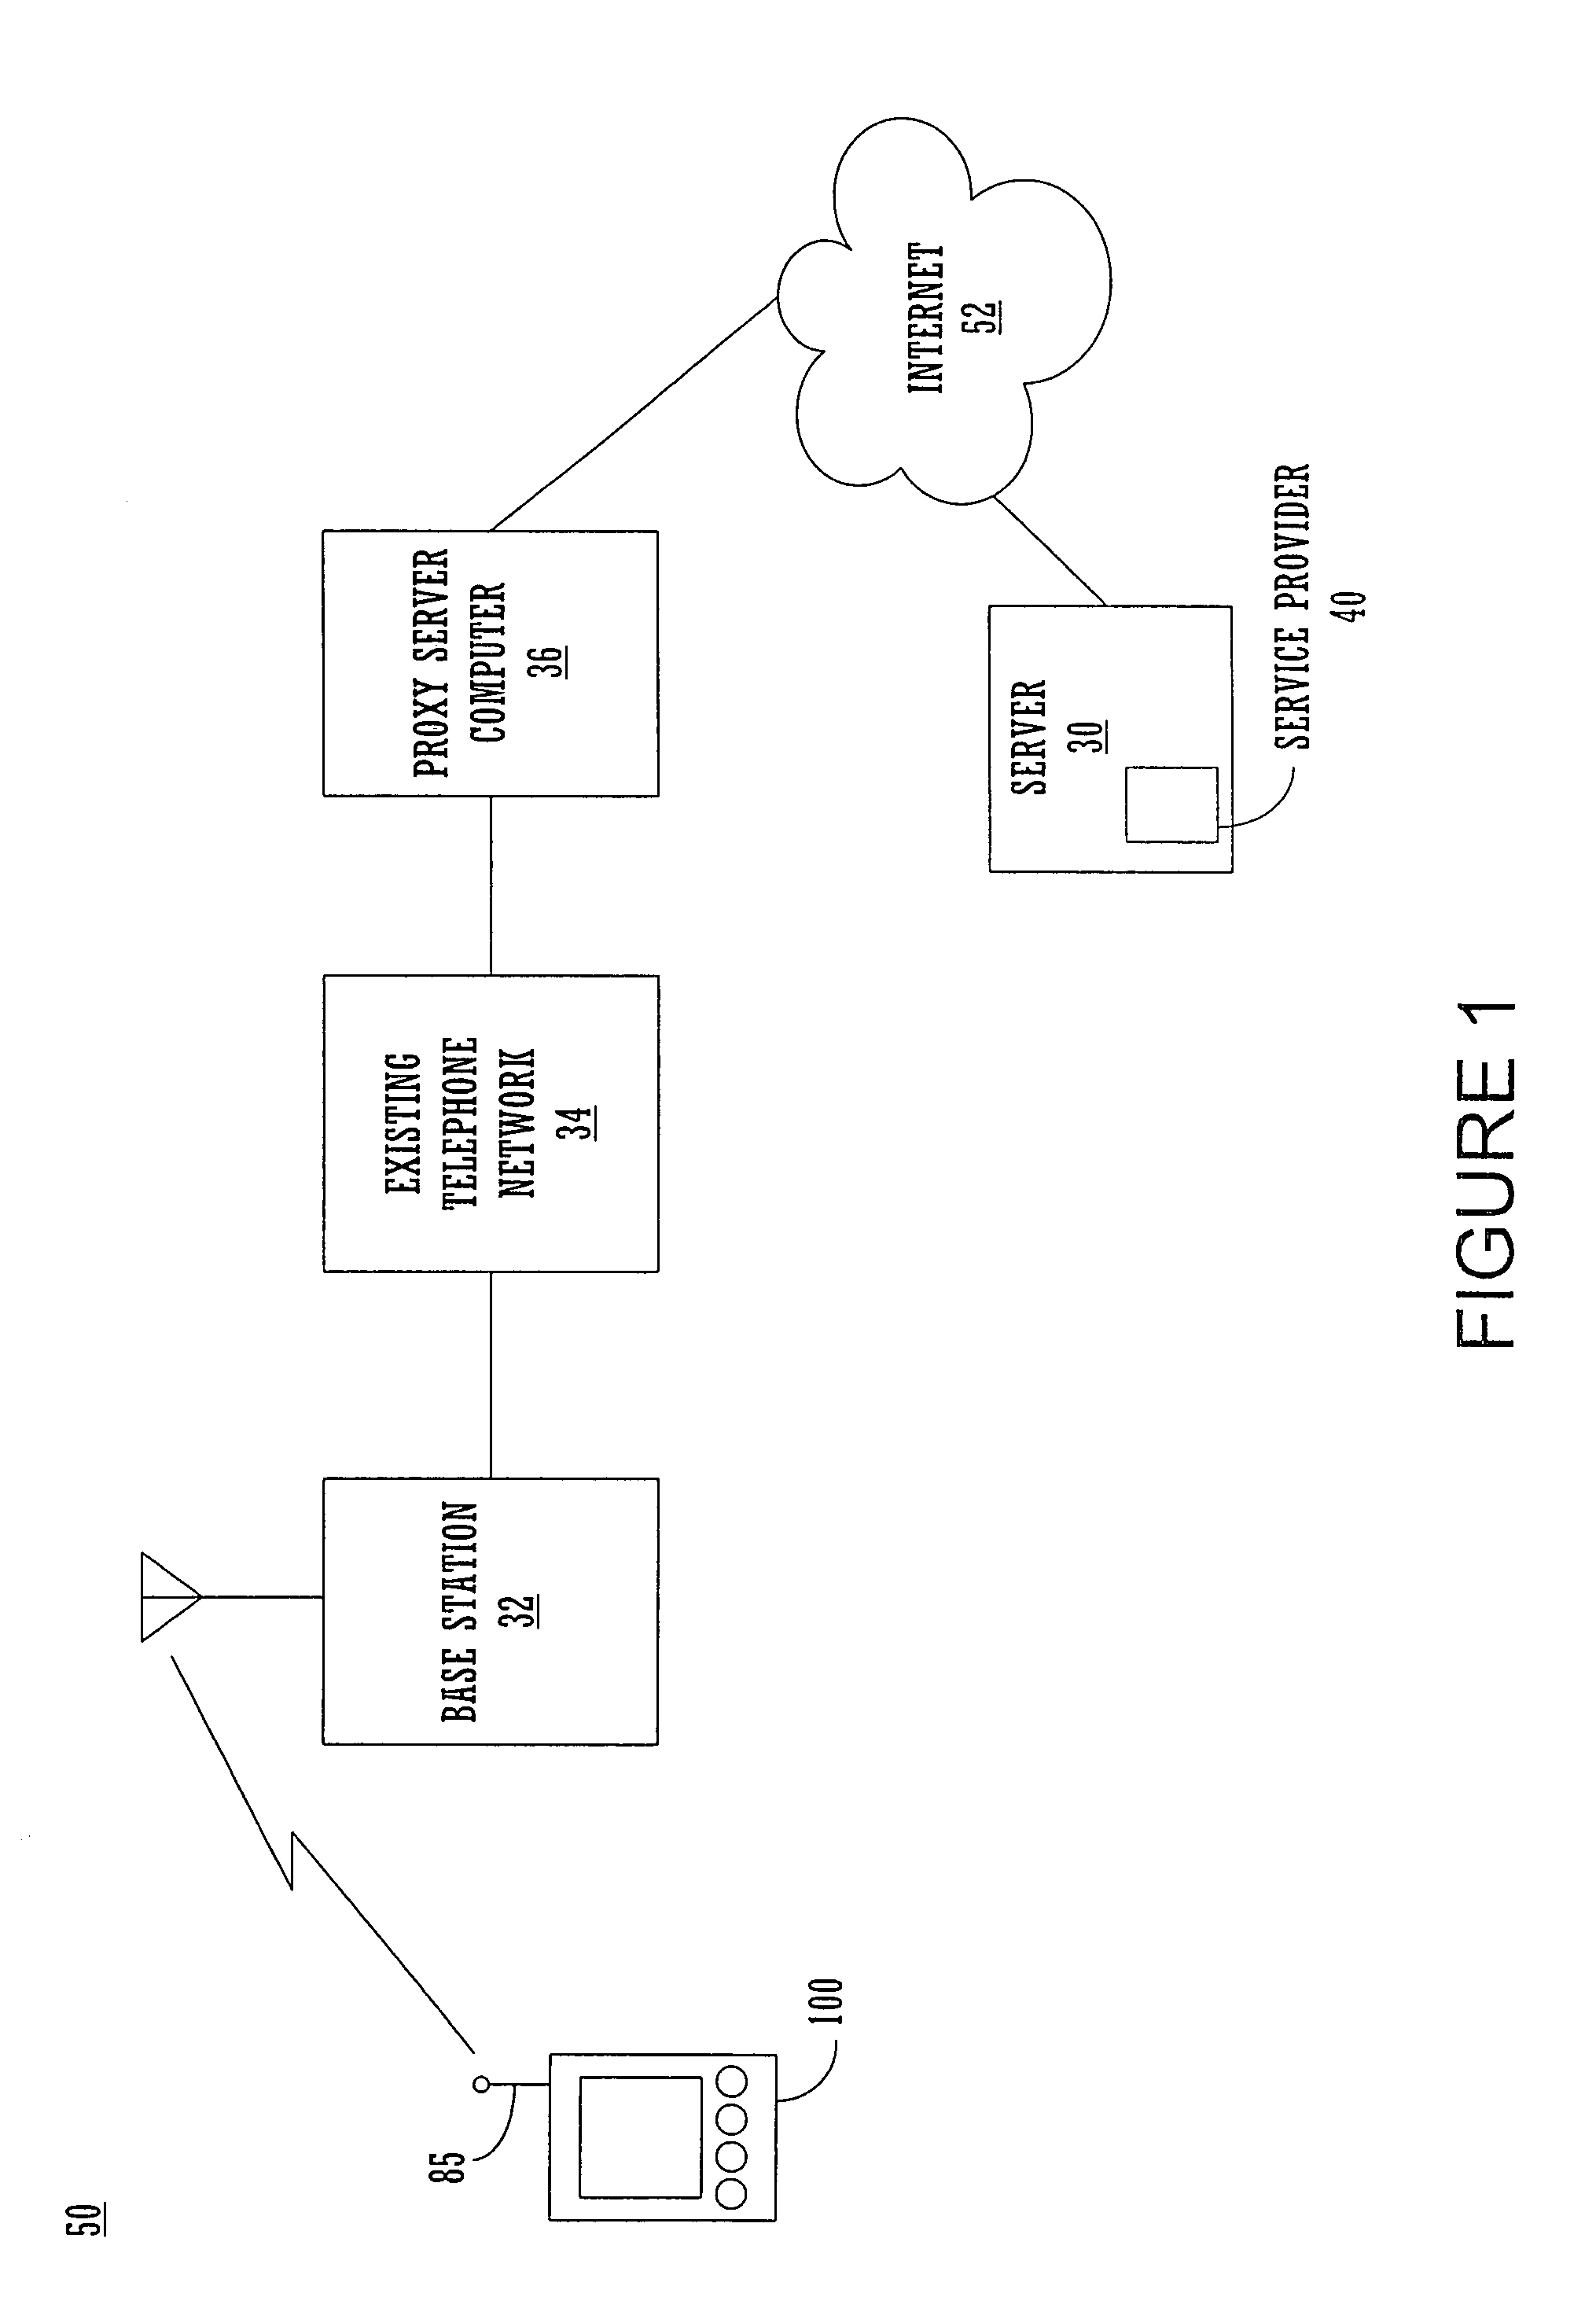 Providing content based on user-specific information from a wireless device